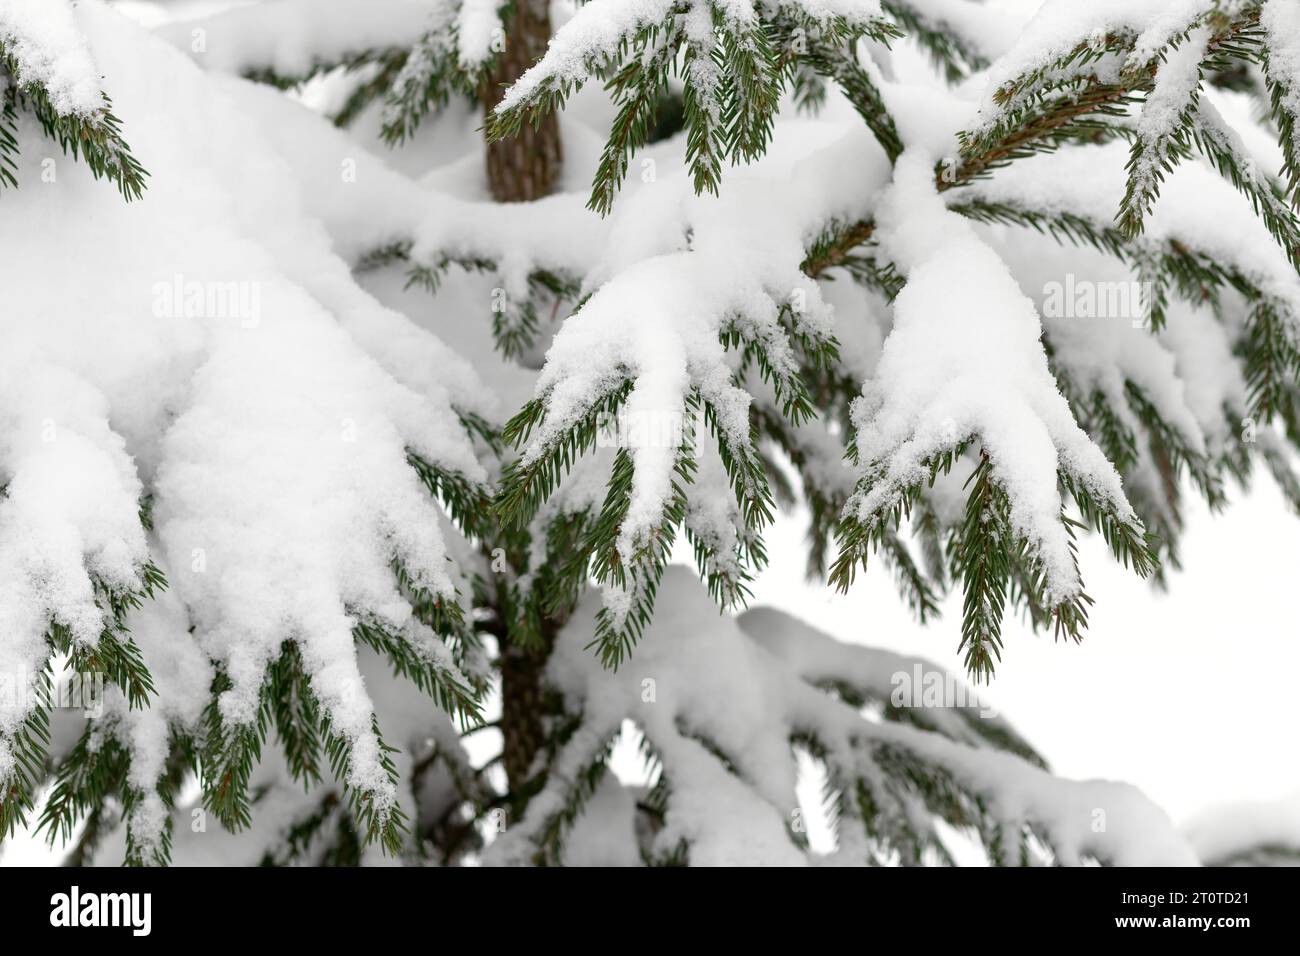 Evergreen Branches Covered In Snow Stock Photo - Download Image